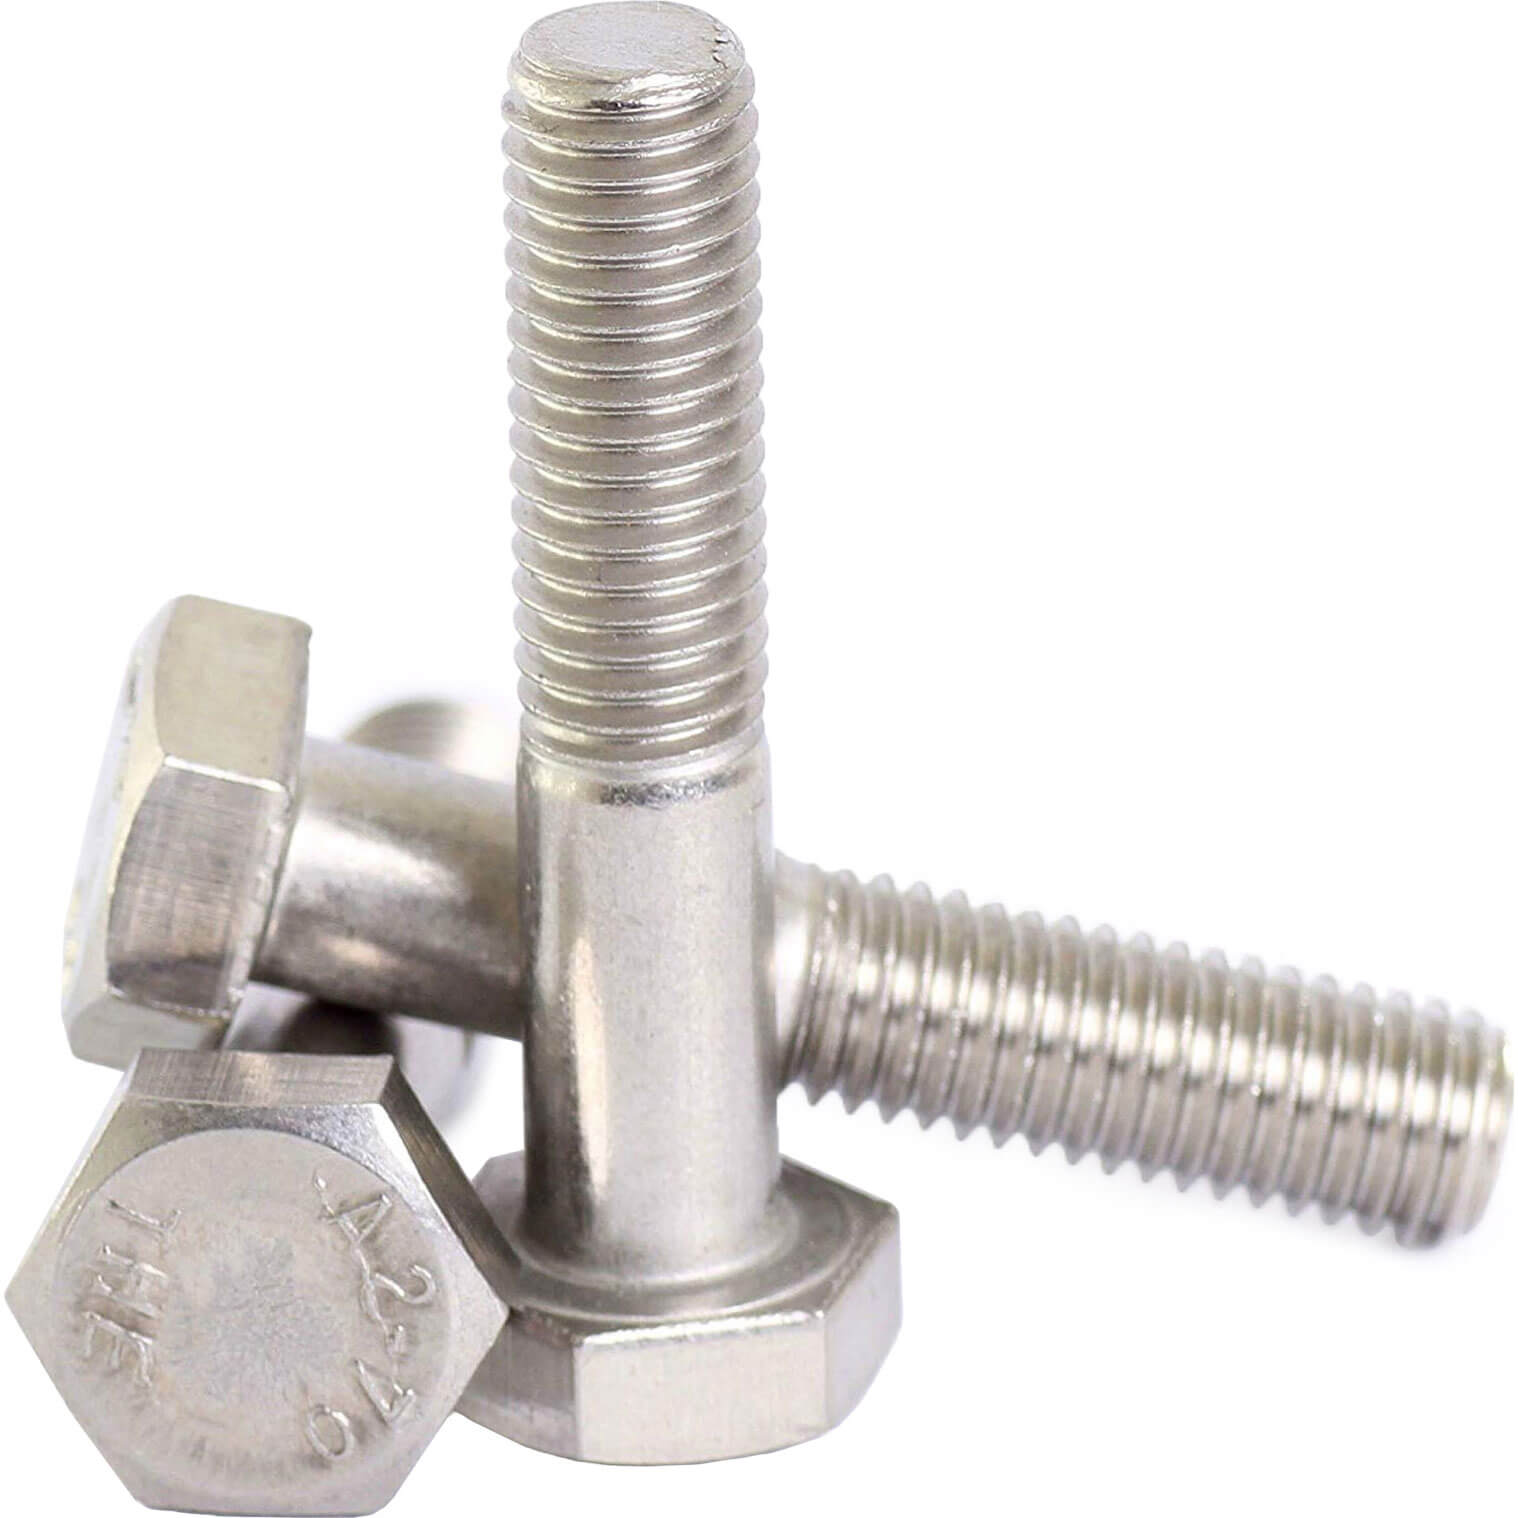 Sirius Bolts A2 304 Stainless Steel M6 45mm Pack of 1